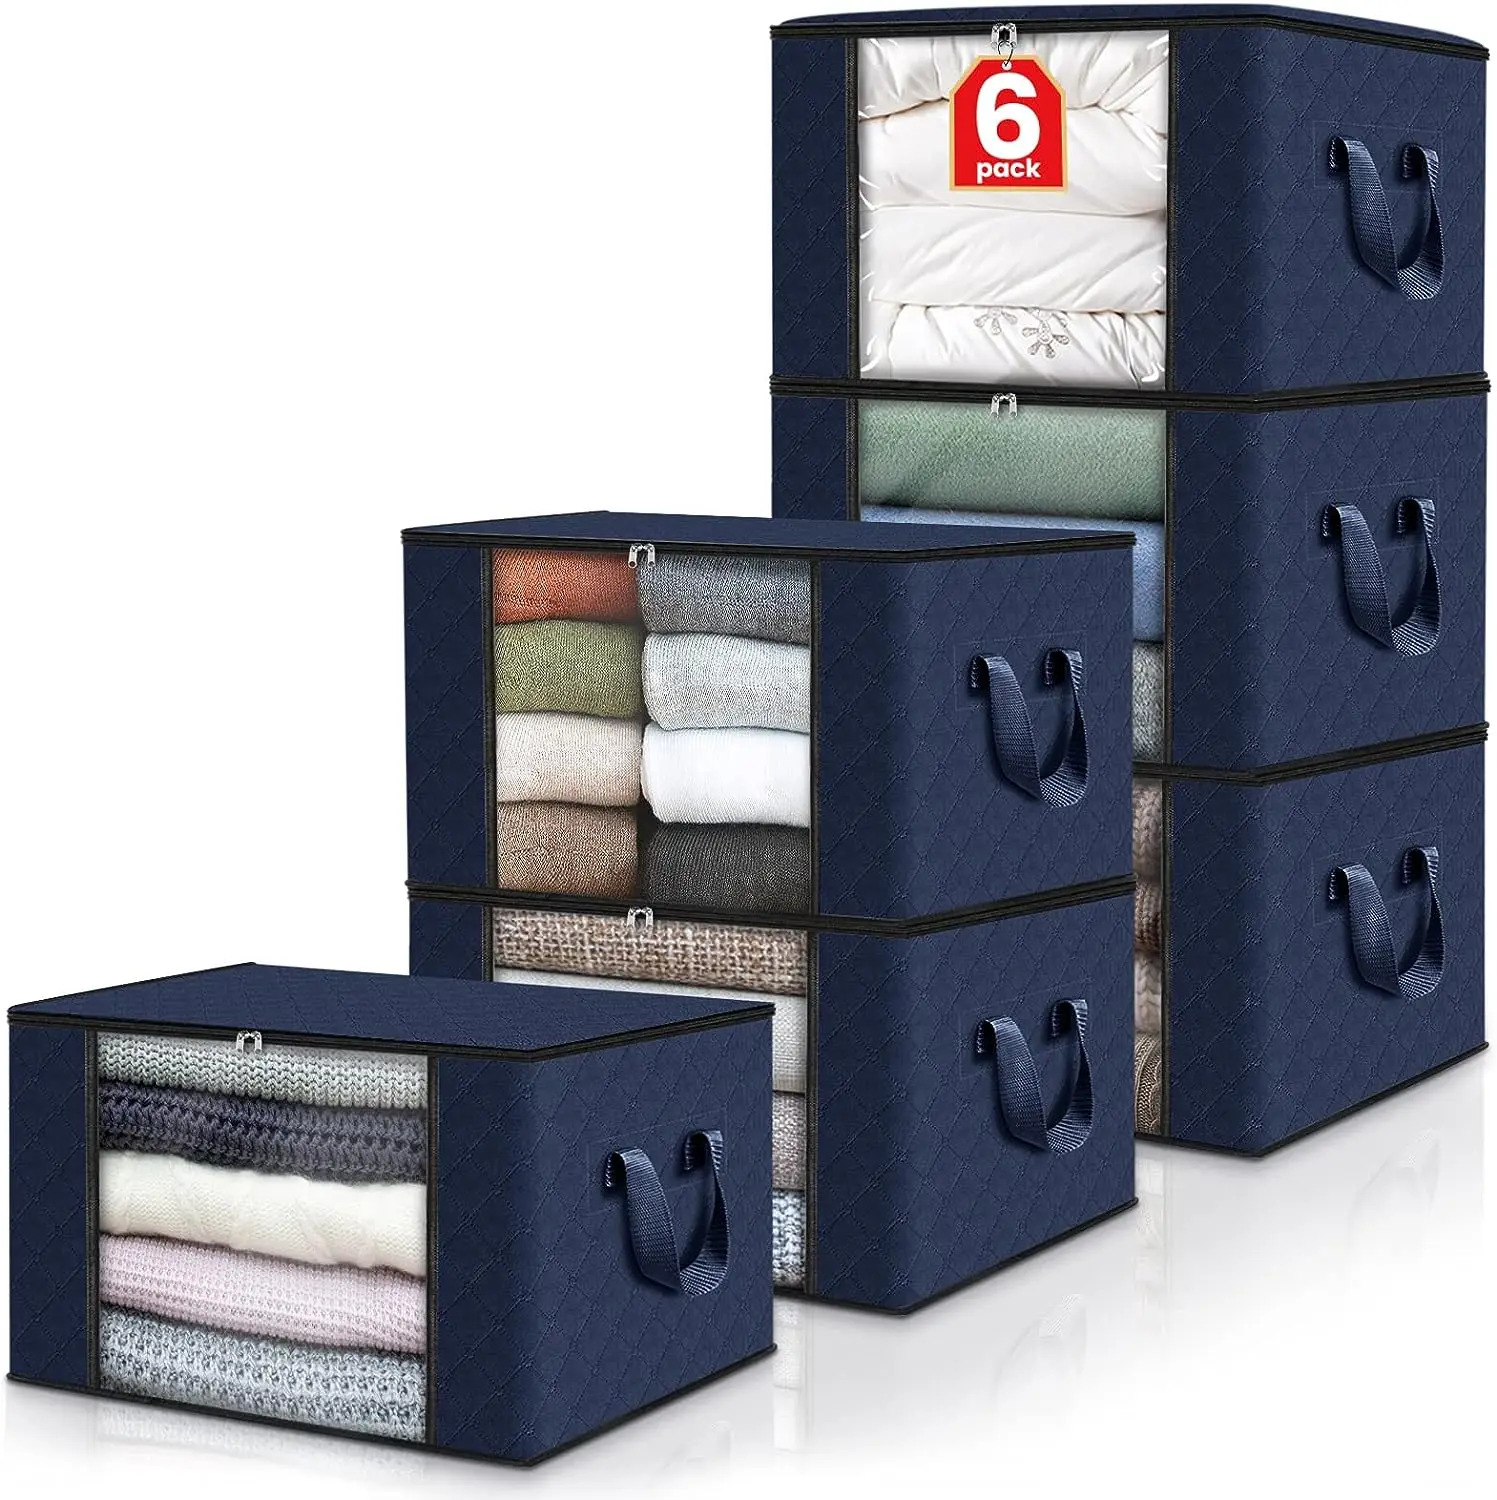 6 Pack Clothes Storage, Foldable Blanket Storage Bags, Storage Containers for Organizing Bedroom, Closet, Organization and Sto